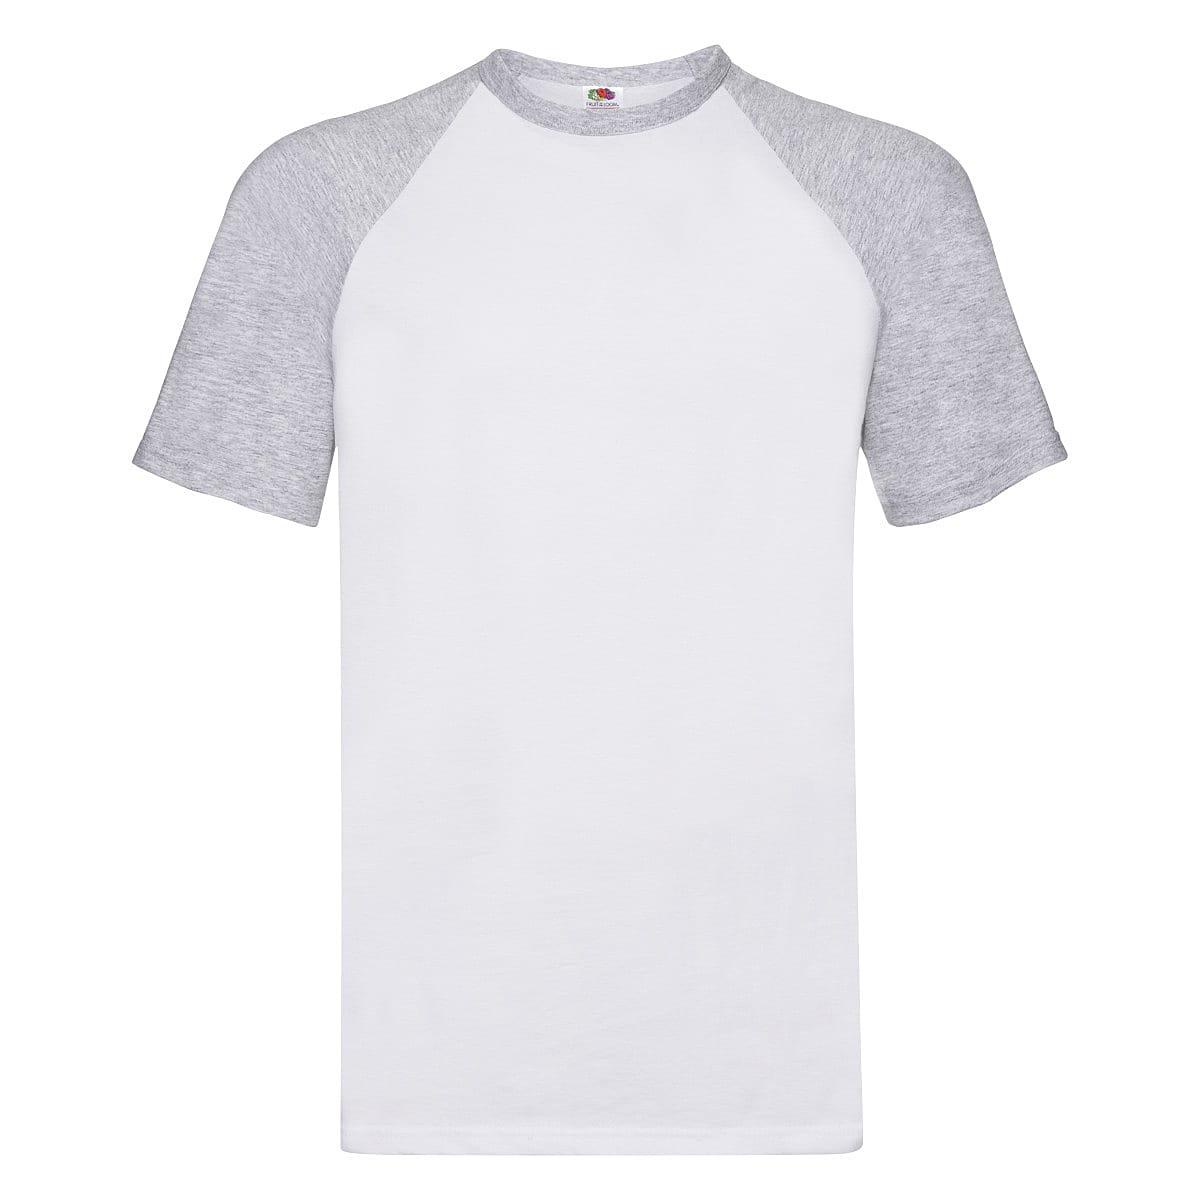 Fruit Of The Loom Short-Sleeve Baseball T-Shirt in White / Heather Grey (Product Code: 61026)